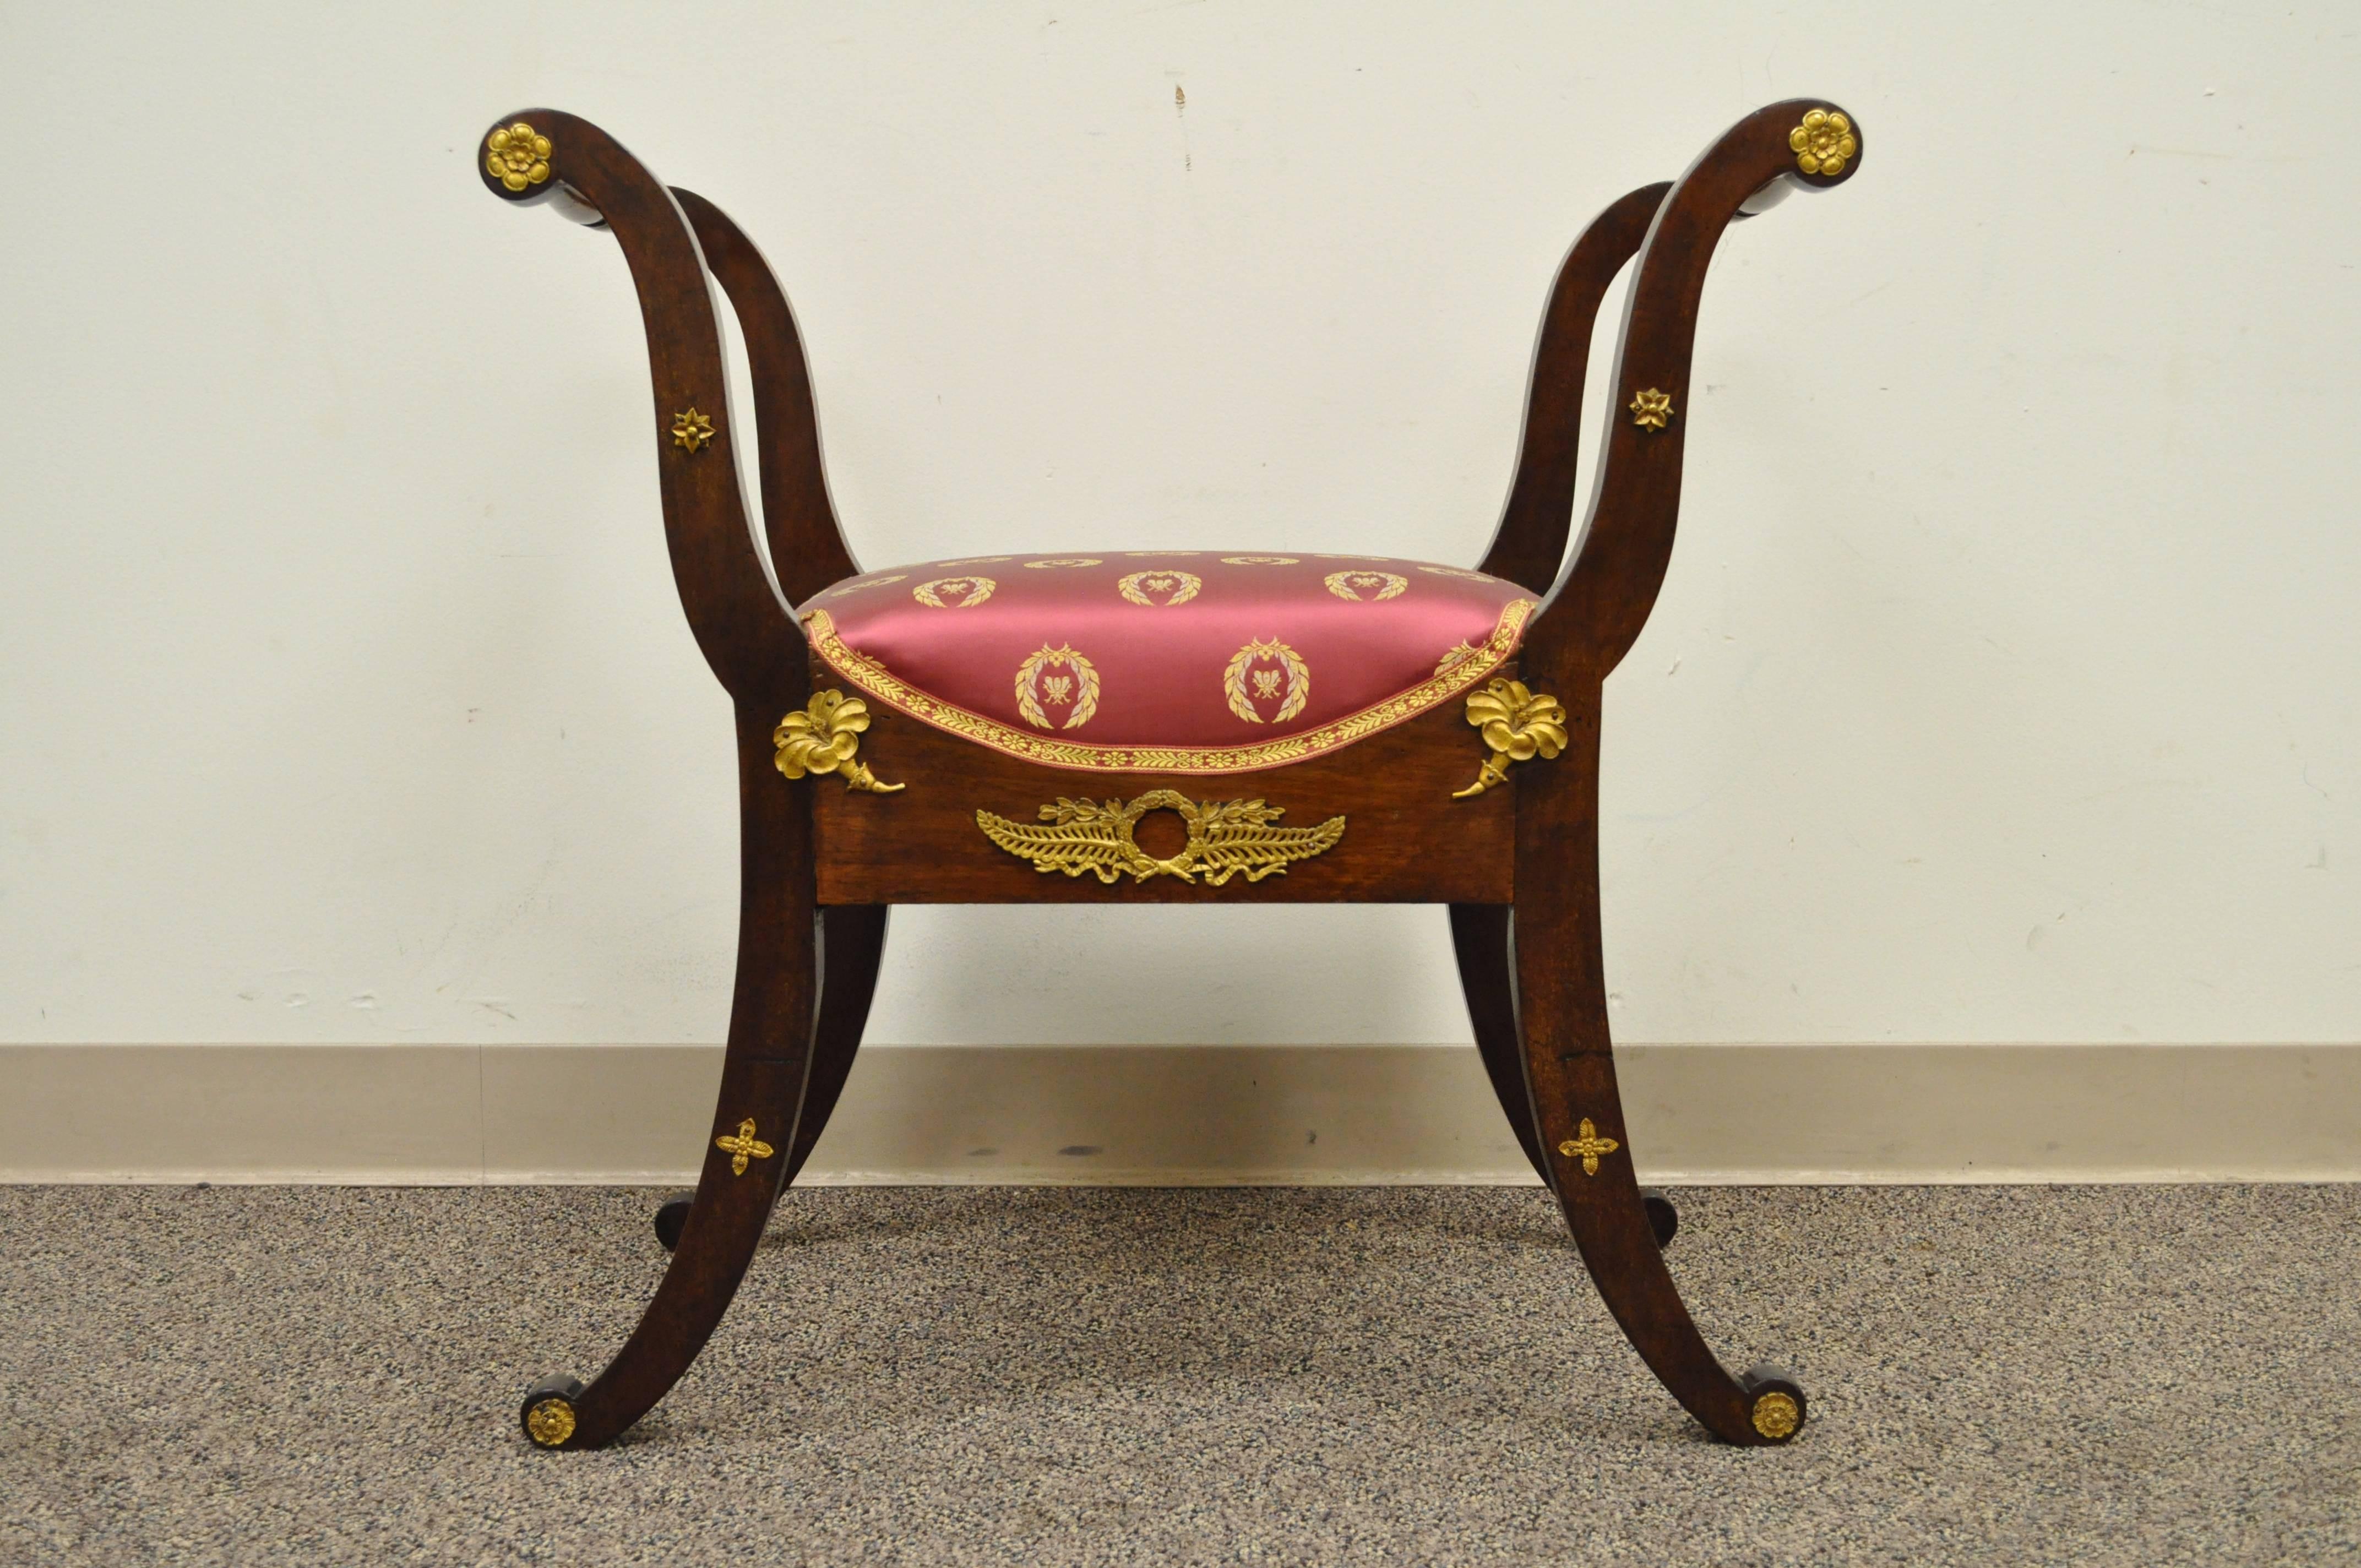 Fantastic 19th century Curule form French neoclassical bench with bronze mounts on all four sides. Item features a solid mahogany frame, classical bronze mounted ormolu all the way around and very elegant form. Newer upholstery.